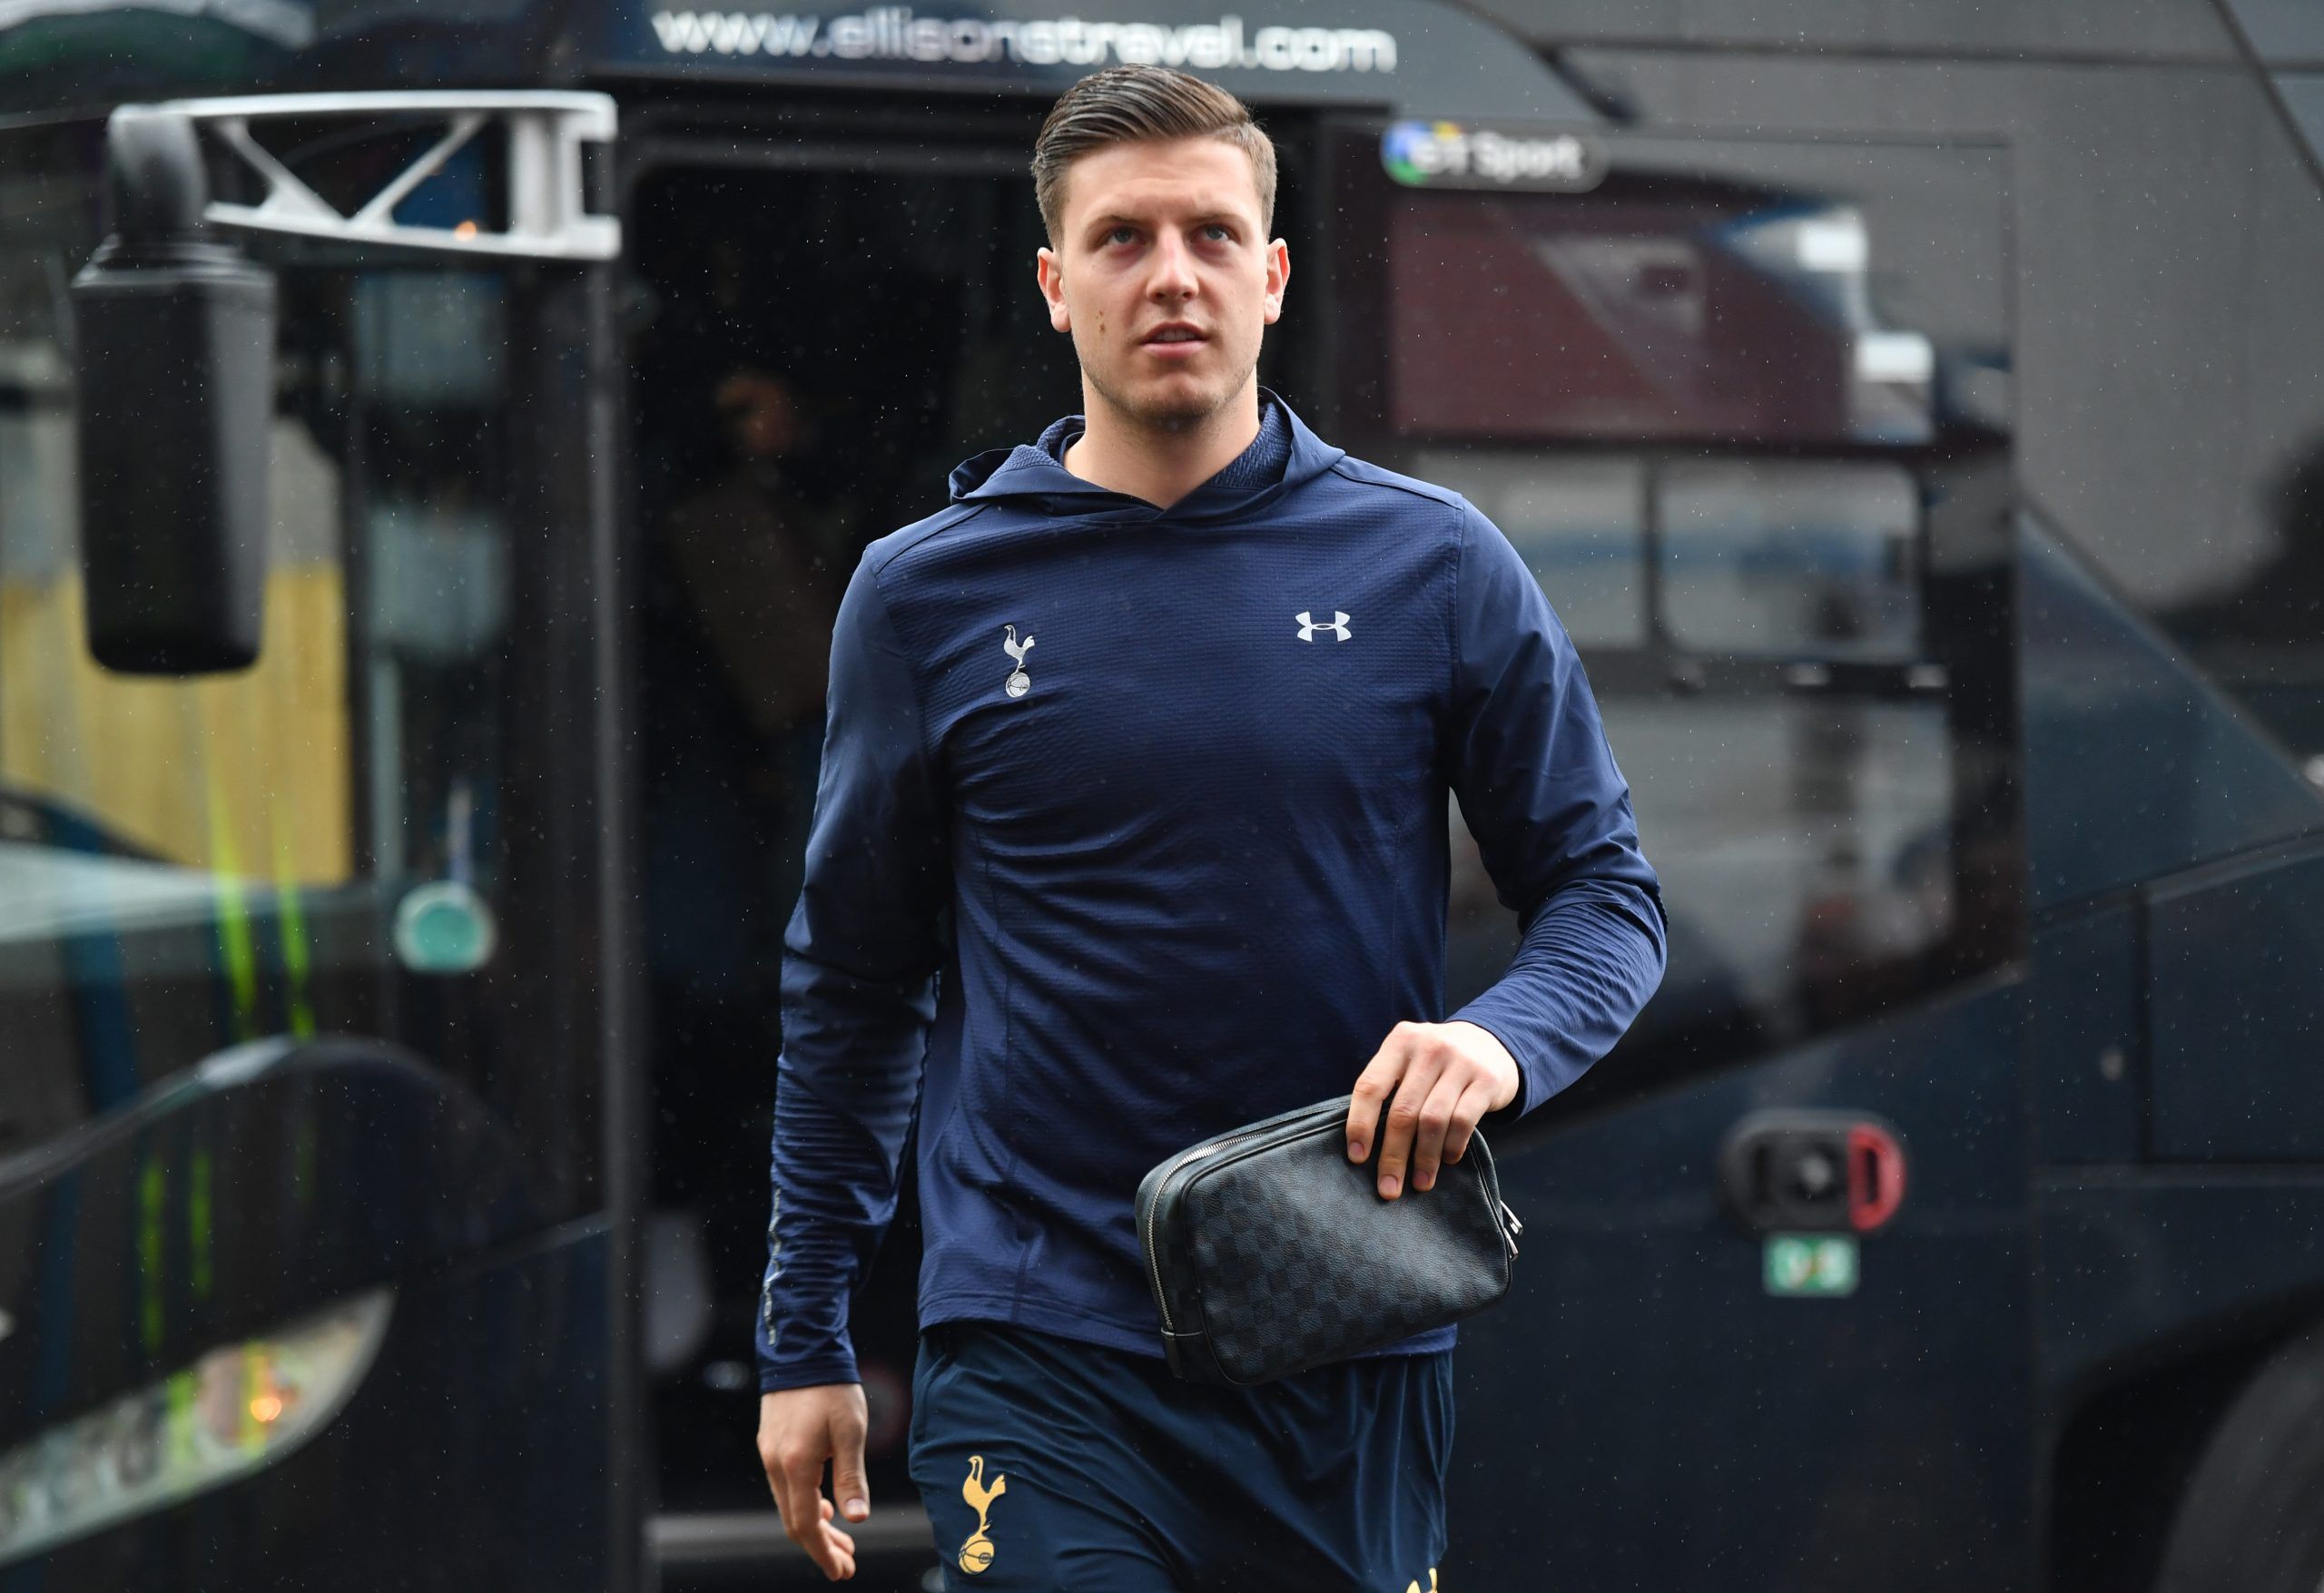 Britain Soccer Football - Burnley v Tottenham Hotspur - Premier League - Turf Moor - 1/4/17 Tottenham's Kevin Wimmer arrives at the stadium before the match  Reuters / Anthony Devlin Livepic EDITORIAL USE ONLY. No use with unauthorized audio, video, data, fixture lists, club/league logos or 